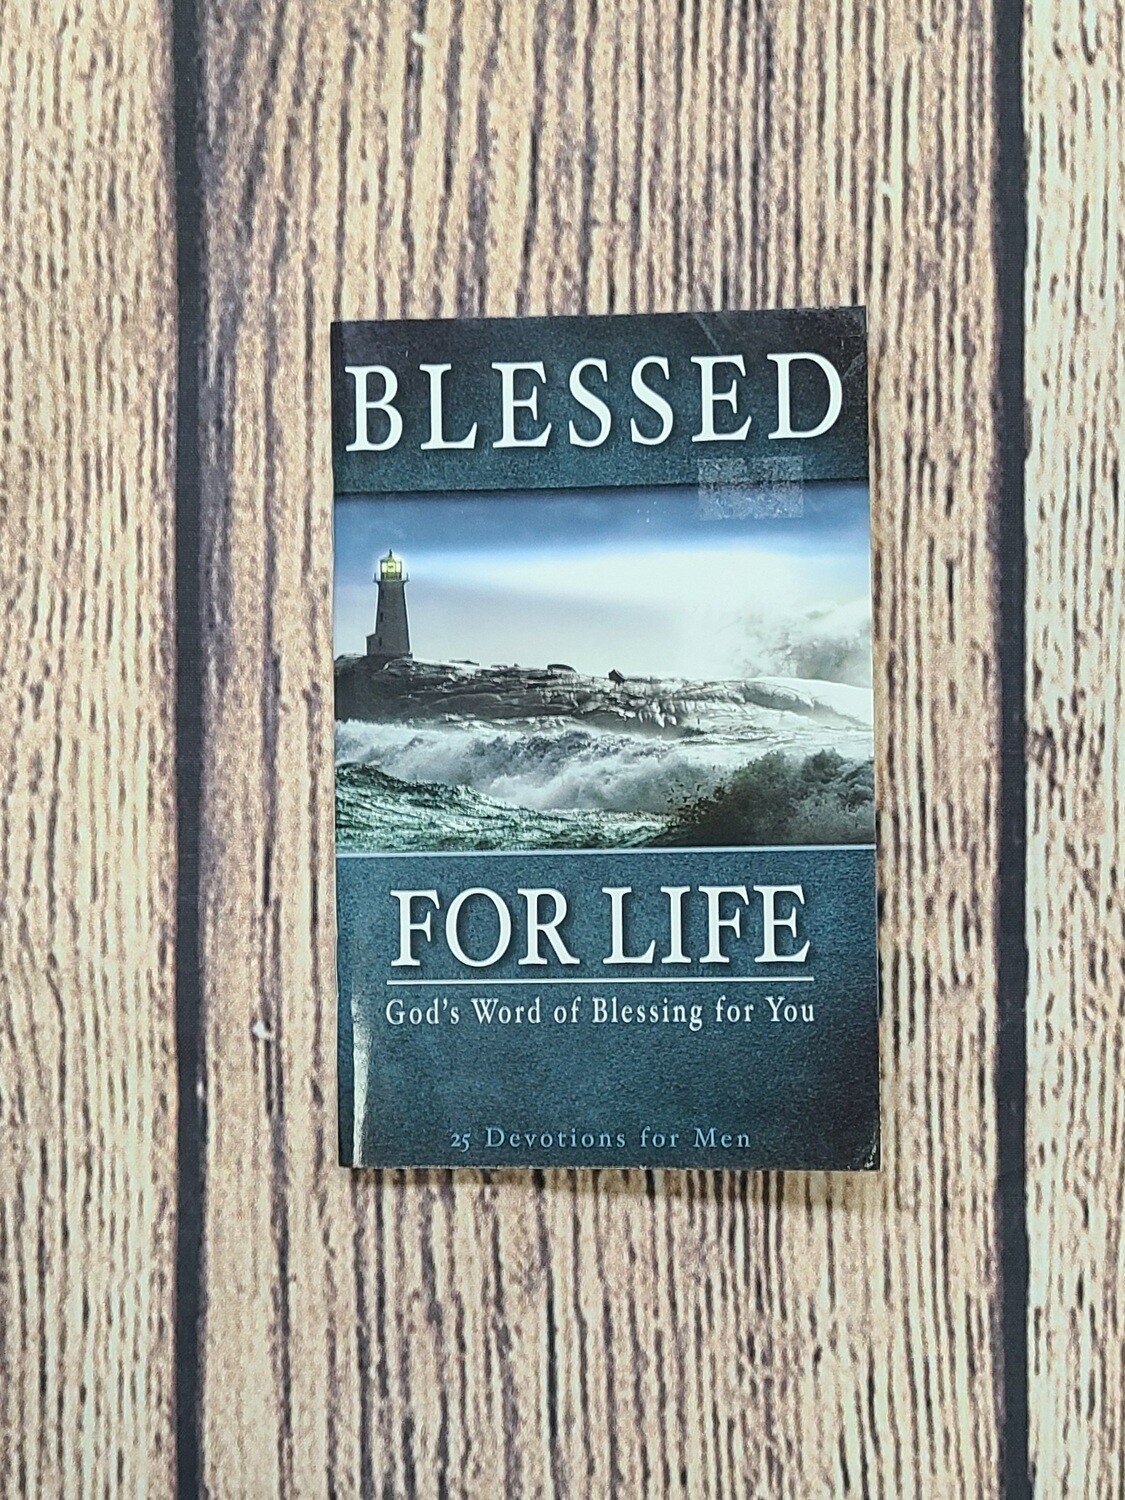 Blessed For Life by David R. Schmitt